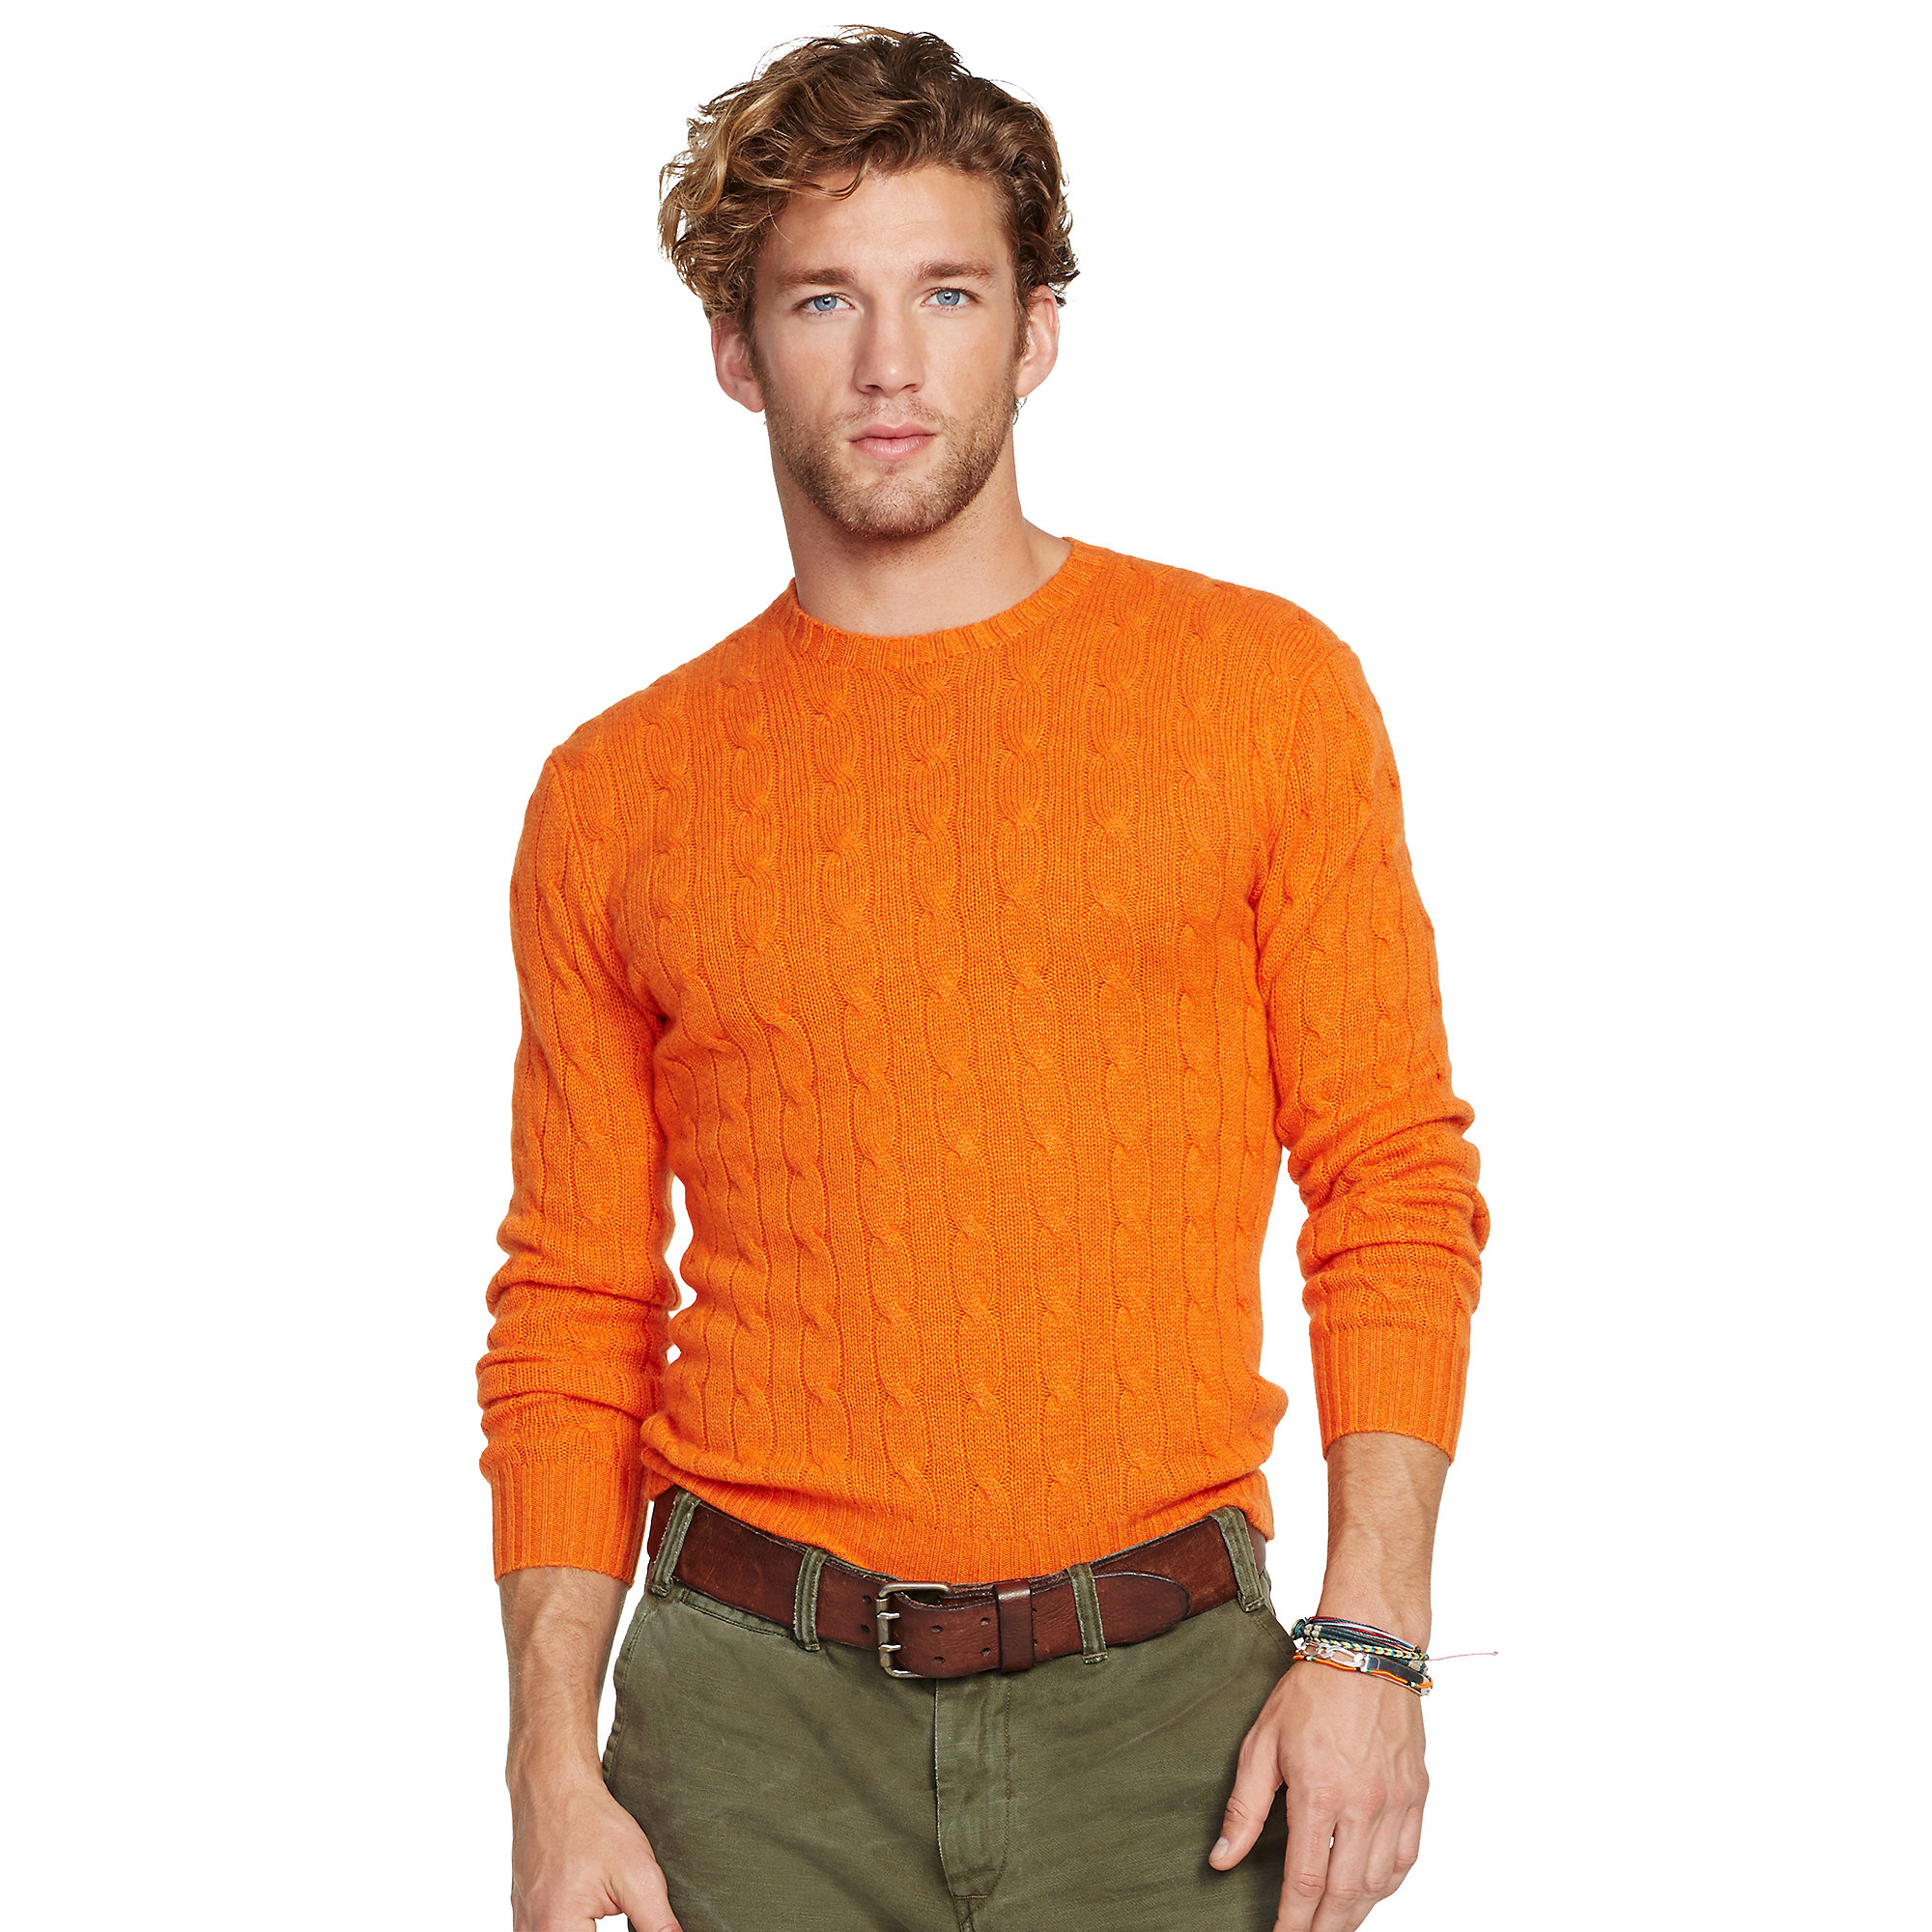 Polo Ralph Lauren Cable-knit Cashmere Sweater in Orange for Men - Lyst